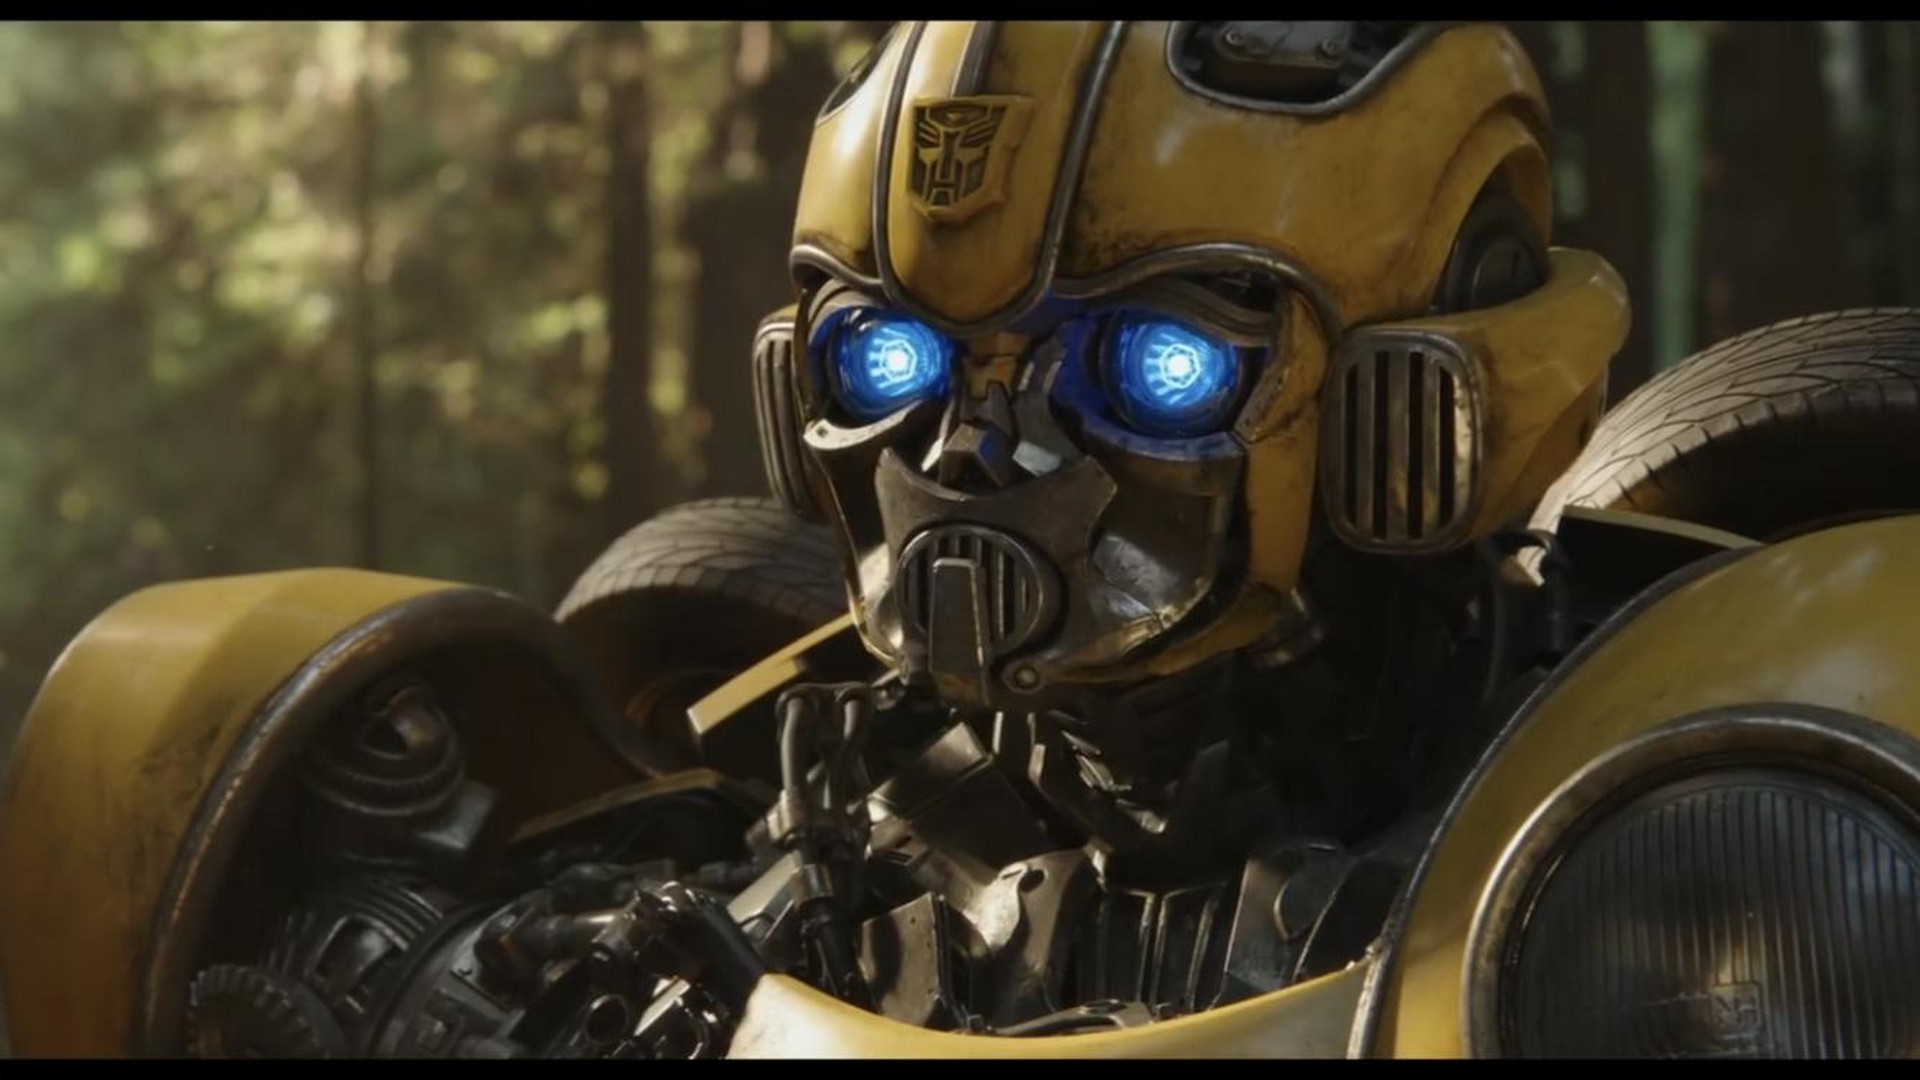 Bumblebee 2018 Poster Wallpaper with resolution 1920x1080 pixel. You can make this wallpaper for your Mac or Windows Desktop Background, iPhone, Android or Tablet and another Smartphone device